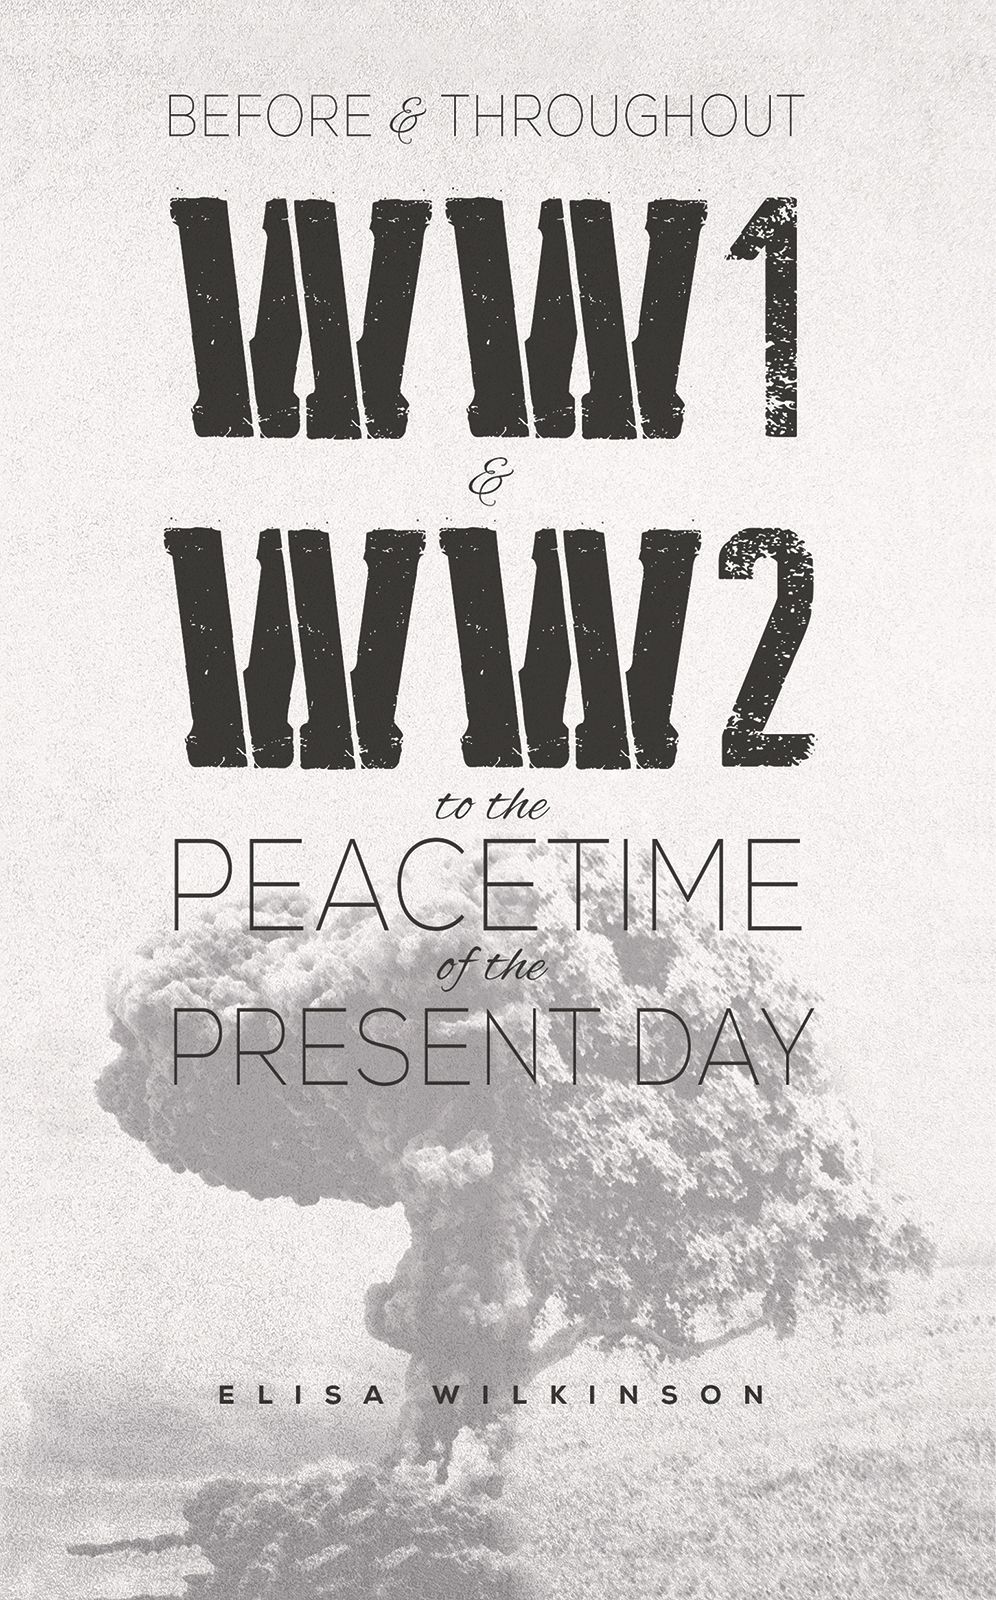 This image is the cover for the book Before and Throughout WW1 and WW2 to the Peacetime of the Present Day